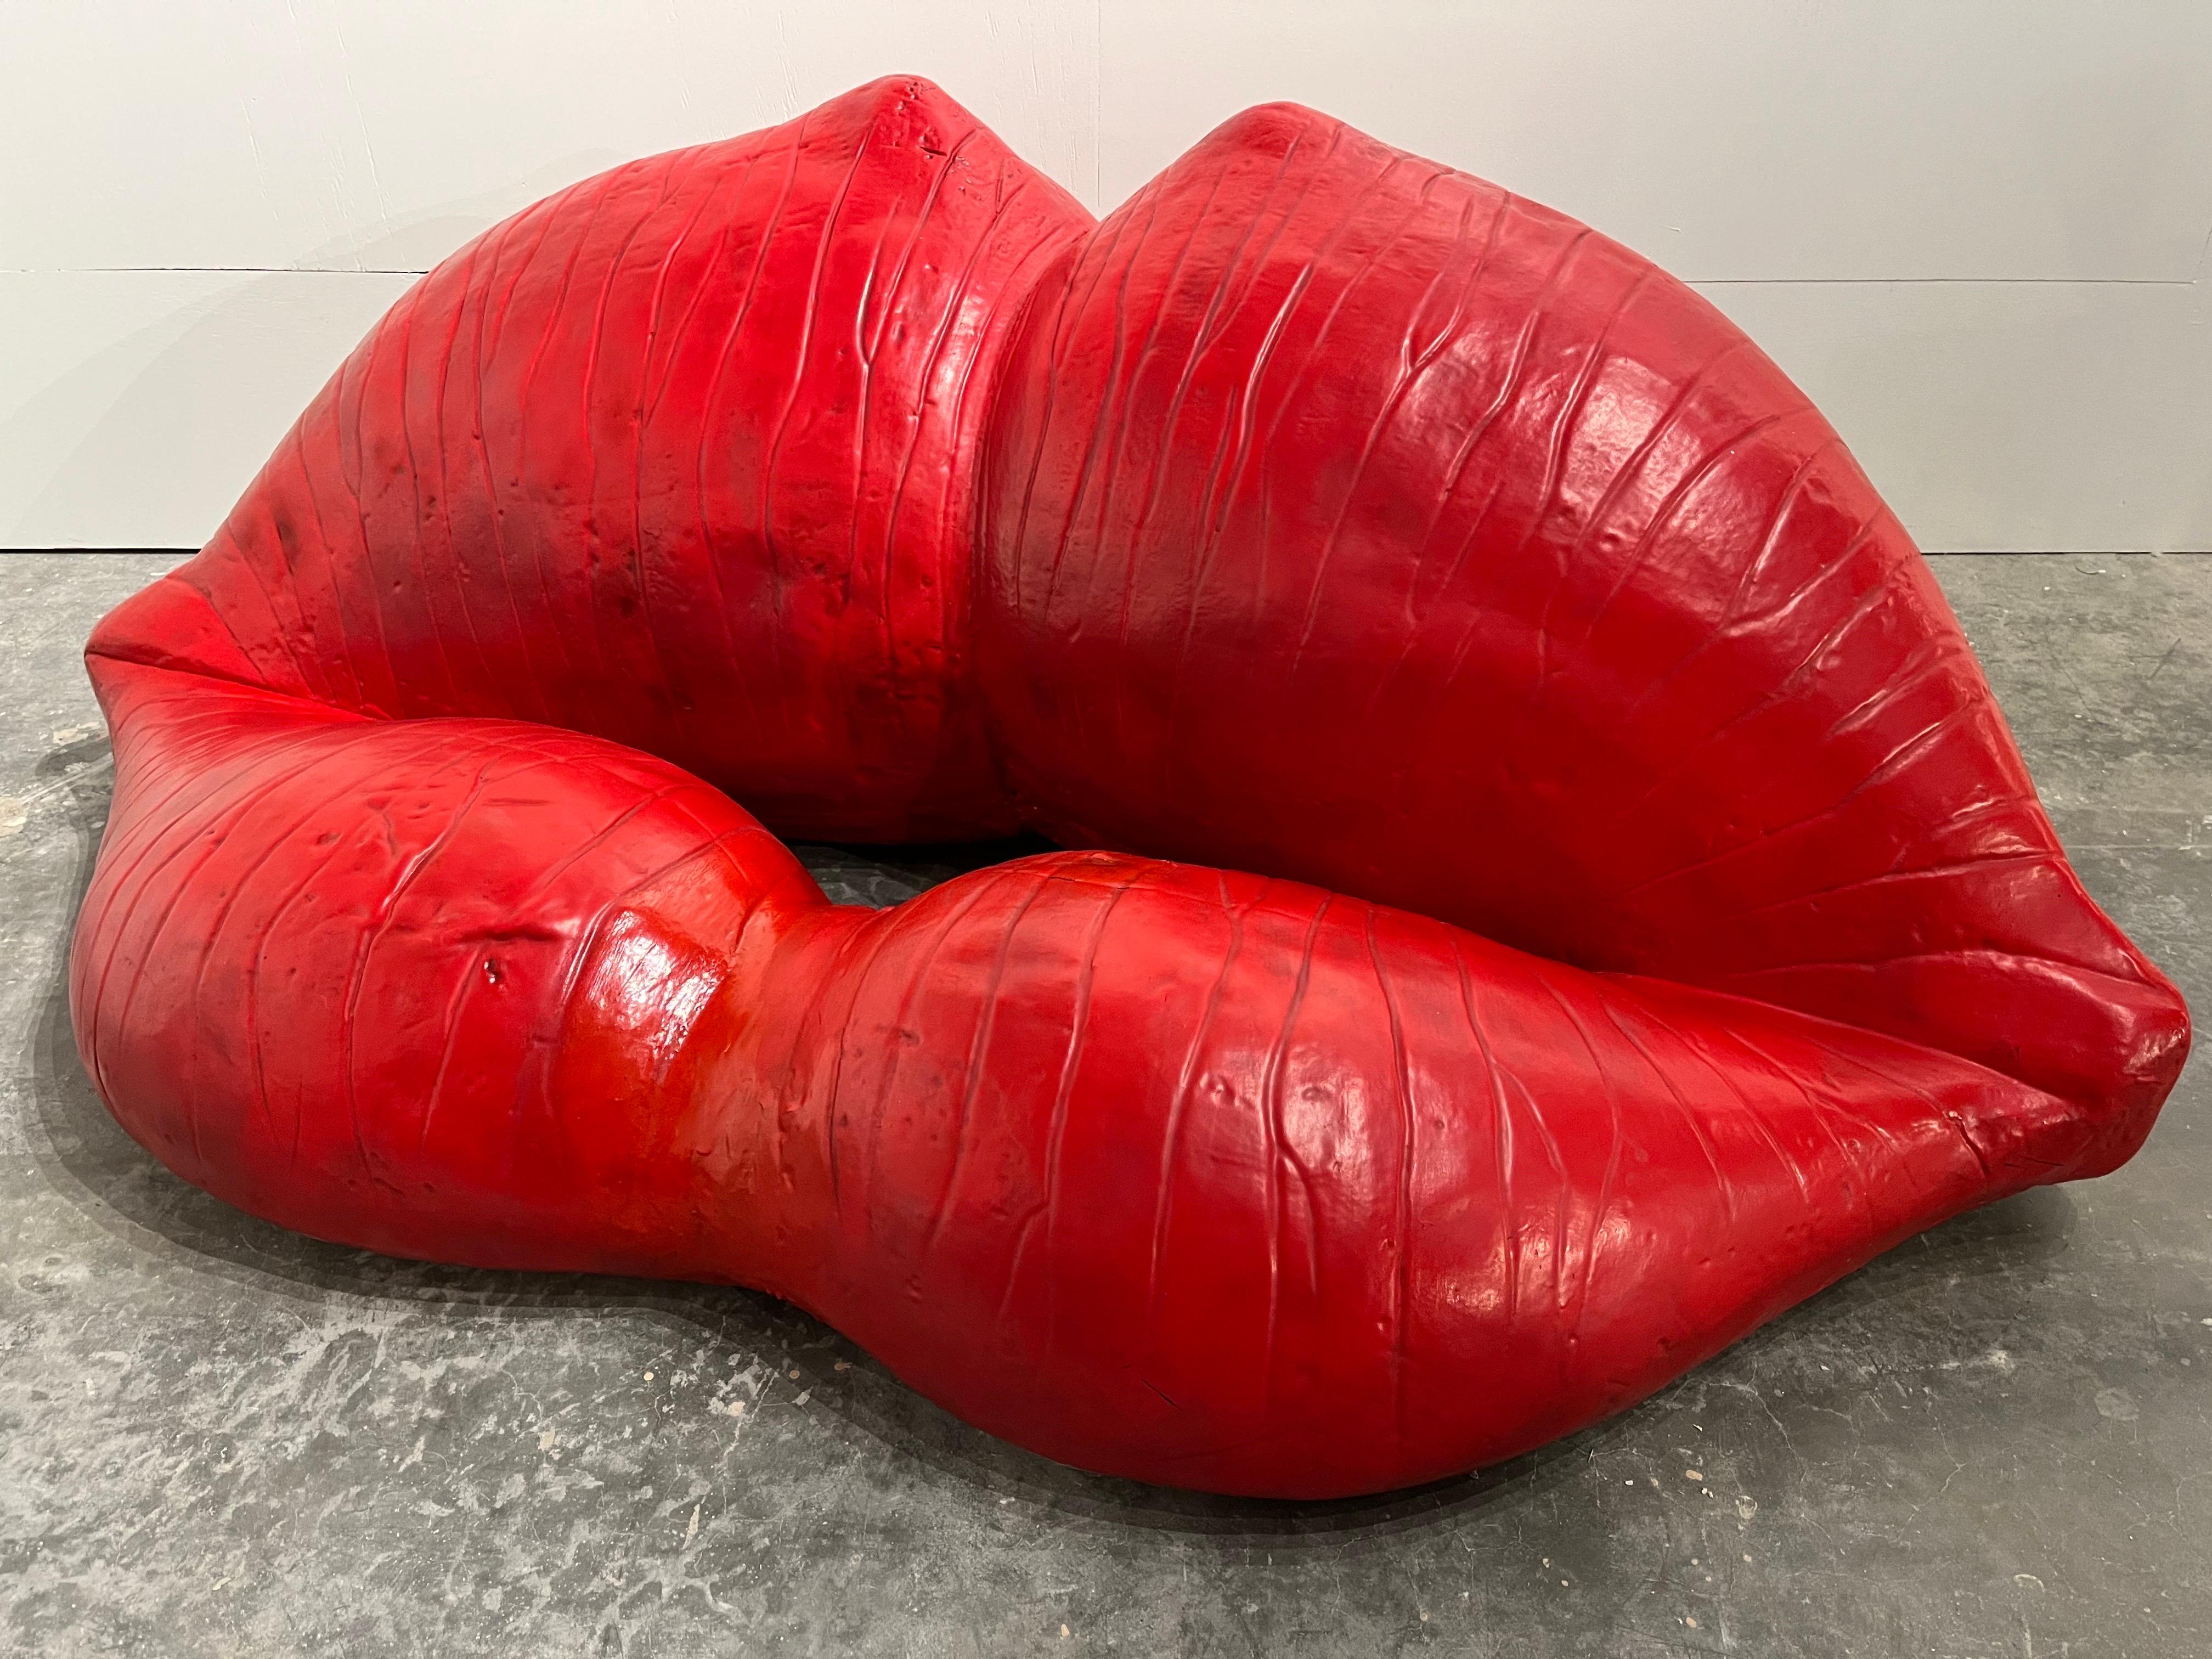 A late 1970's, post modern or pop art sculptural settee sofa by French artist and scientist Louis Durot (b. 1939). - This is one of three works that I am offering through my 1stdibs storefront, HKFA. Search HKFA on 1stdibs, view my storefront and